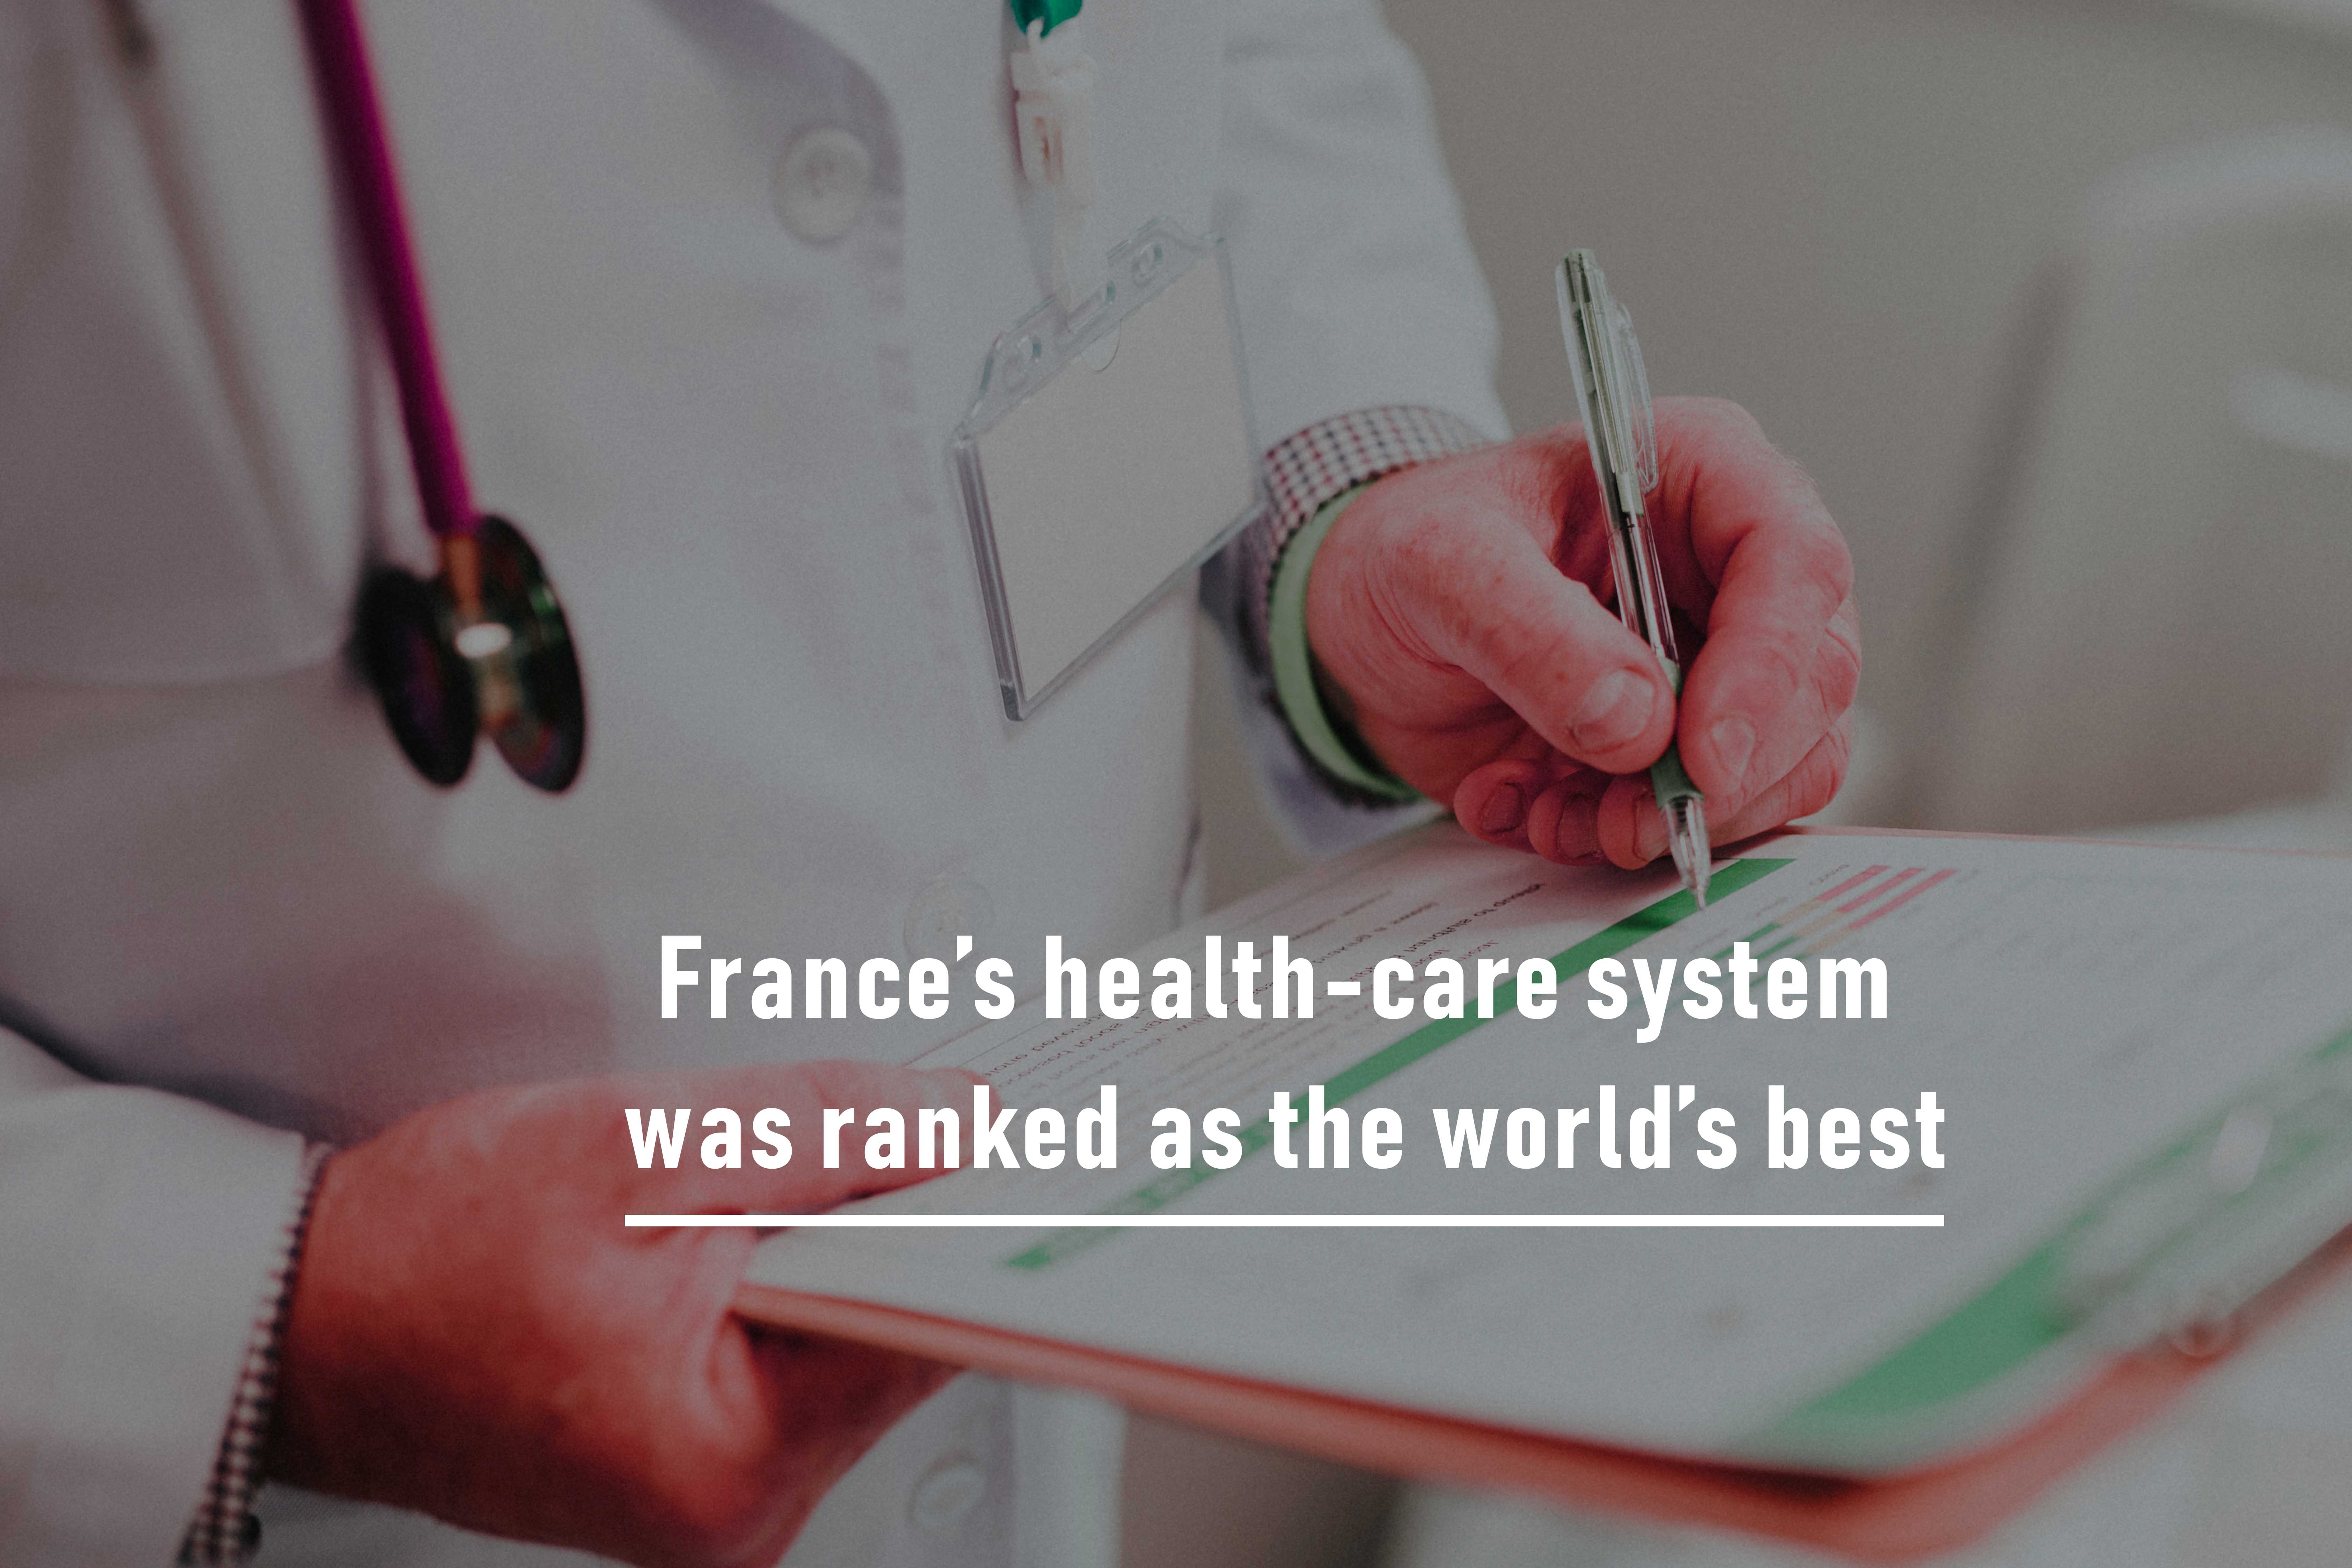 World’s best ranked Health-care System of France vs. the US Health-care System